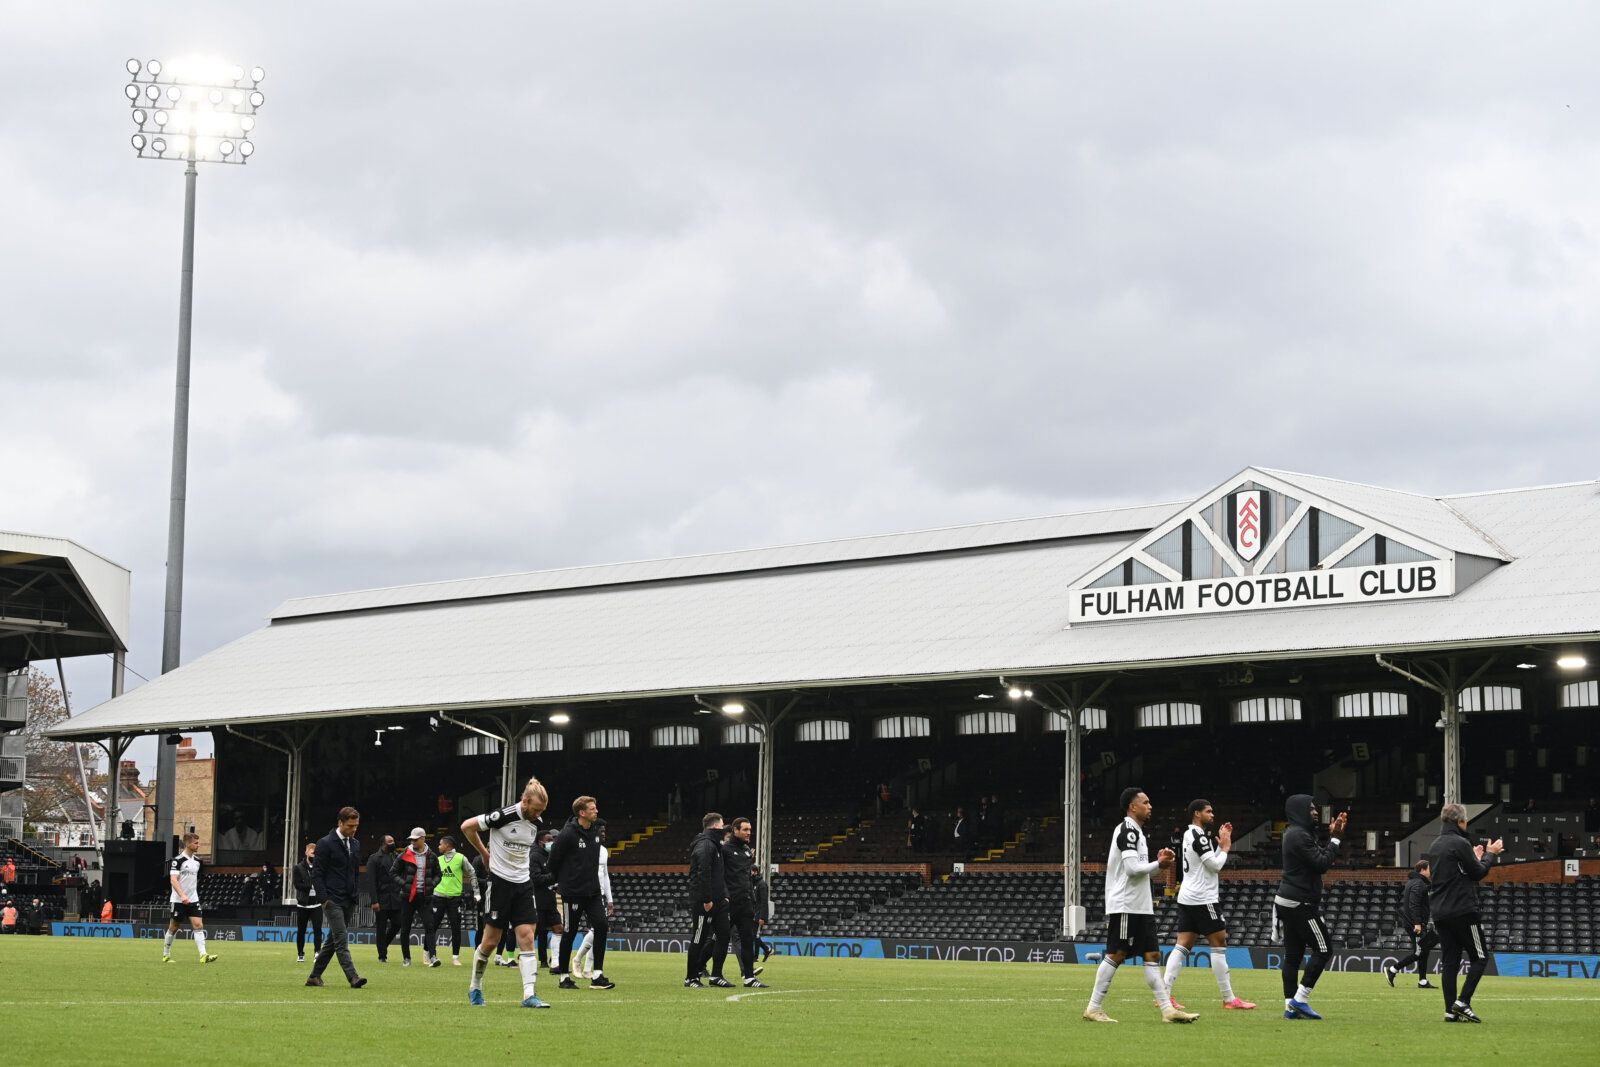 Soccer Football - Premier League - Fulham v Newcastle United - Craven Cottage, London, Britain - May 23, 2021 General view as Fulham players applaud fans after the match, as a limited number of fans are permitted at outdoor sports venues Pool via REUTERS/Glyn Kirk EDITORIAL USE ONLY. No use with unauthorized audio, video, data, fixture lists, club/league logos or 'live' services. Online in-match use limited to 75 images, no video emulation. No use in betting, games or single club /league/player 